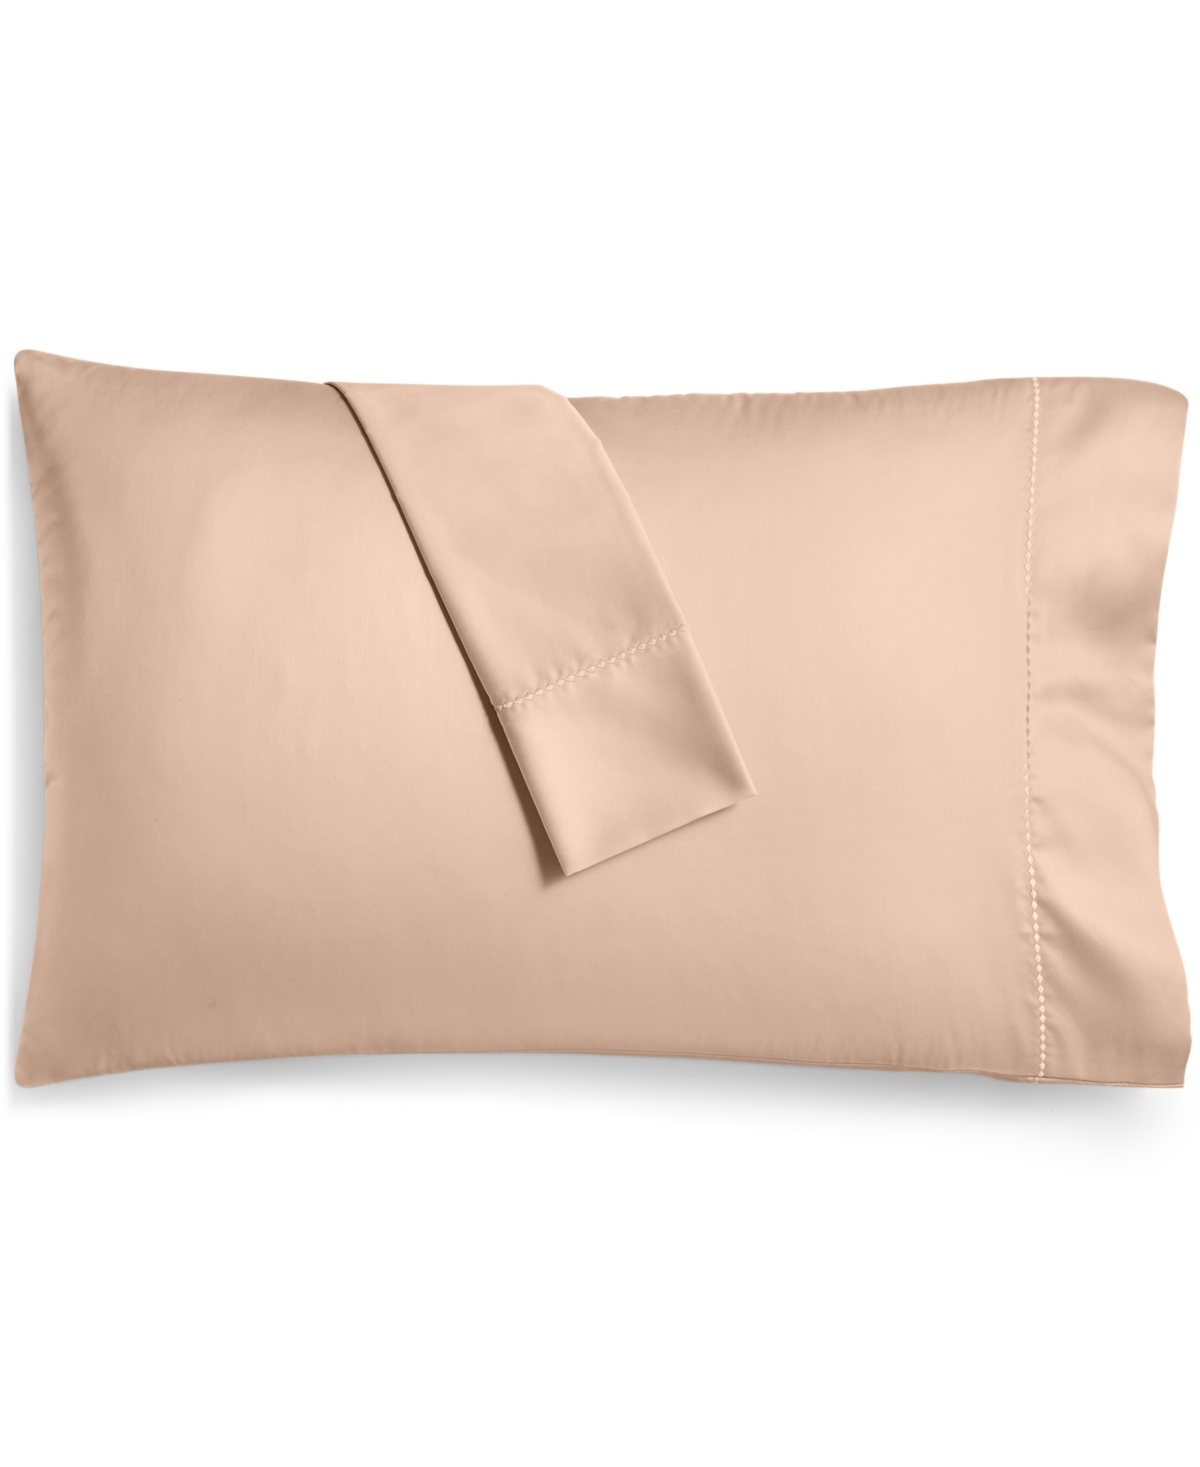 Martha Stewart Collection Closeout!  Open Stock Solid 400 Thread Count Cotton Sateen Pillowcase, Stan In Peach